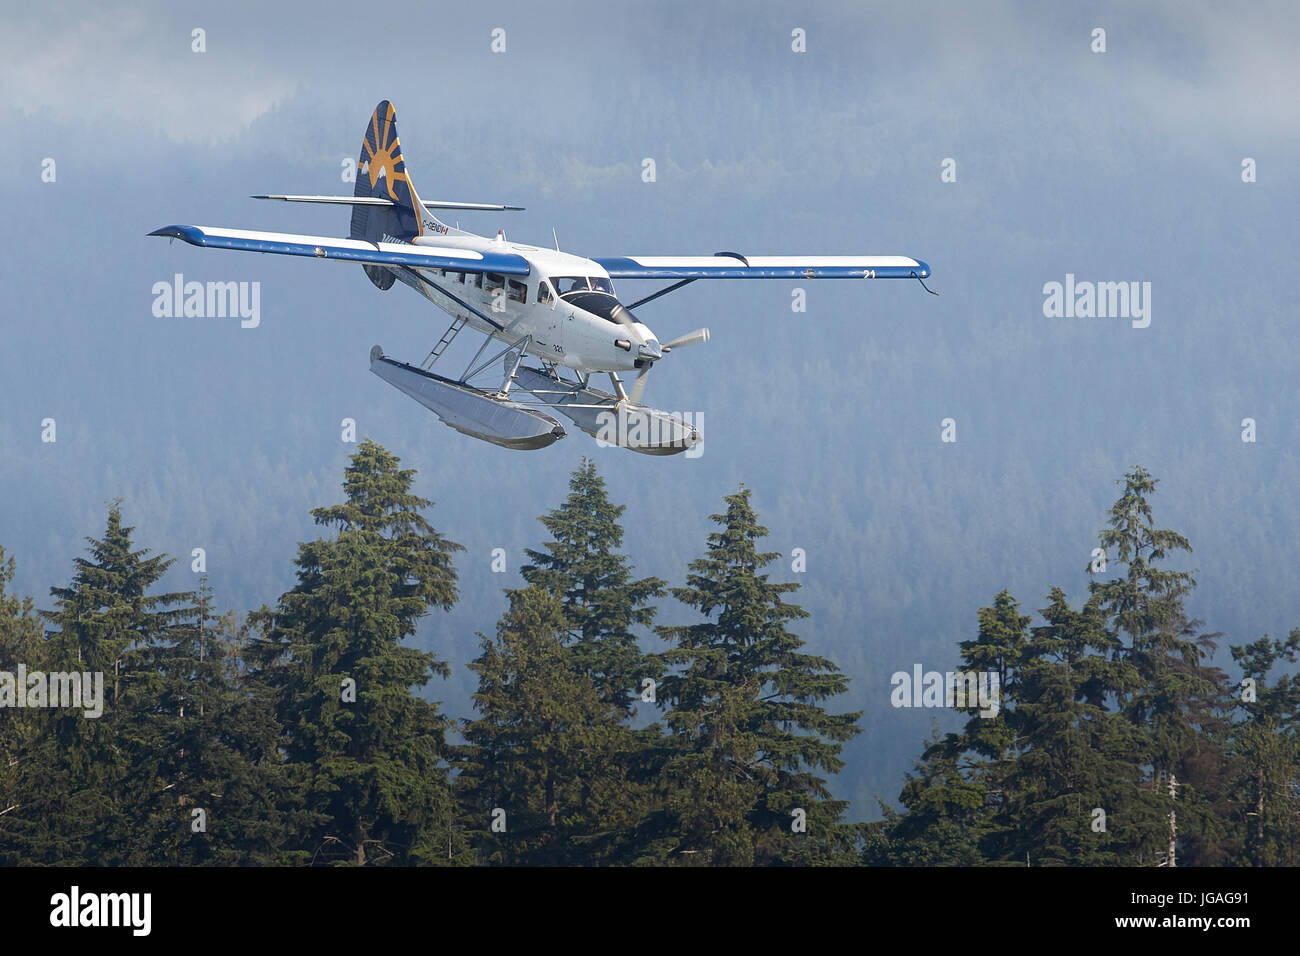 Harbour Air Turbo Otter Floatplane In The Whistler Air Insignia Approaching Vancouver Harbour, British Columbia, Canada. Stock Photo